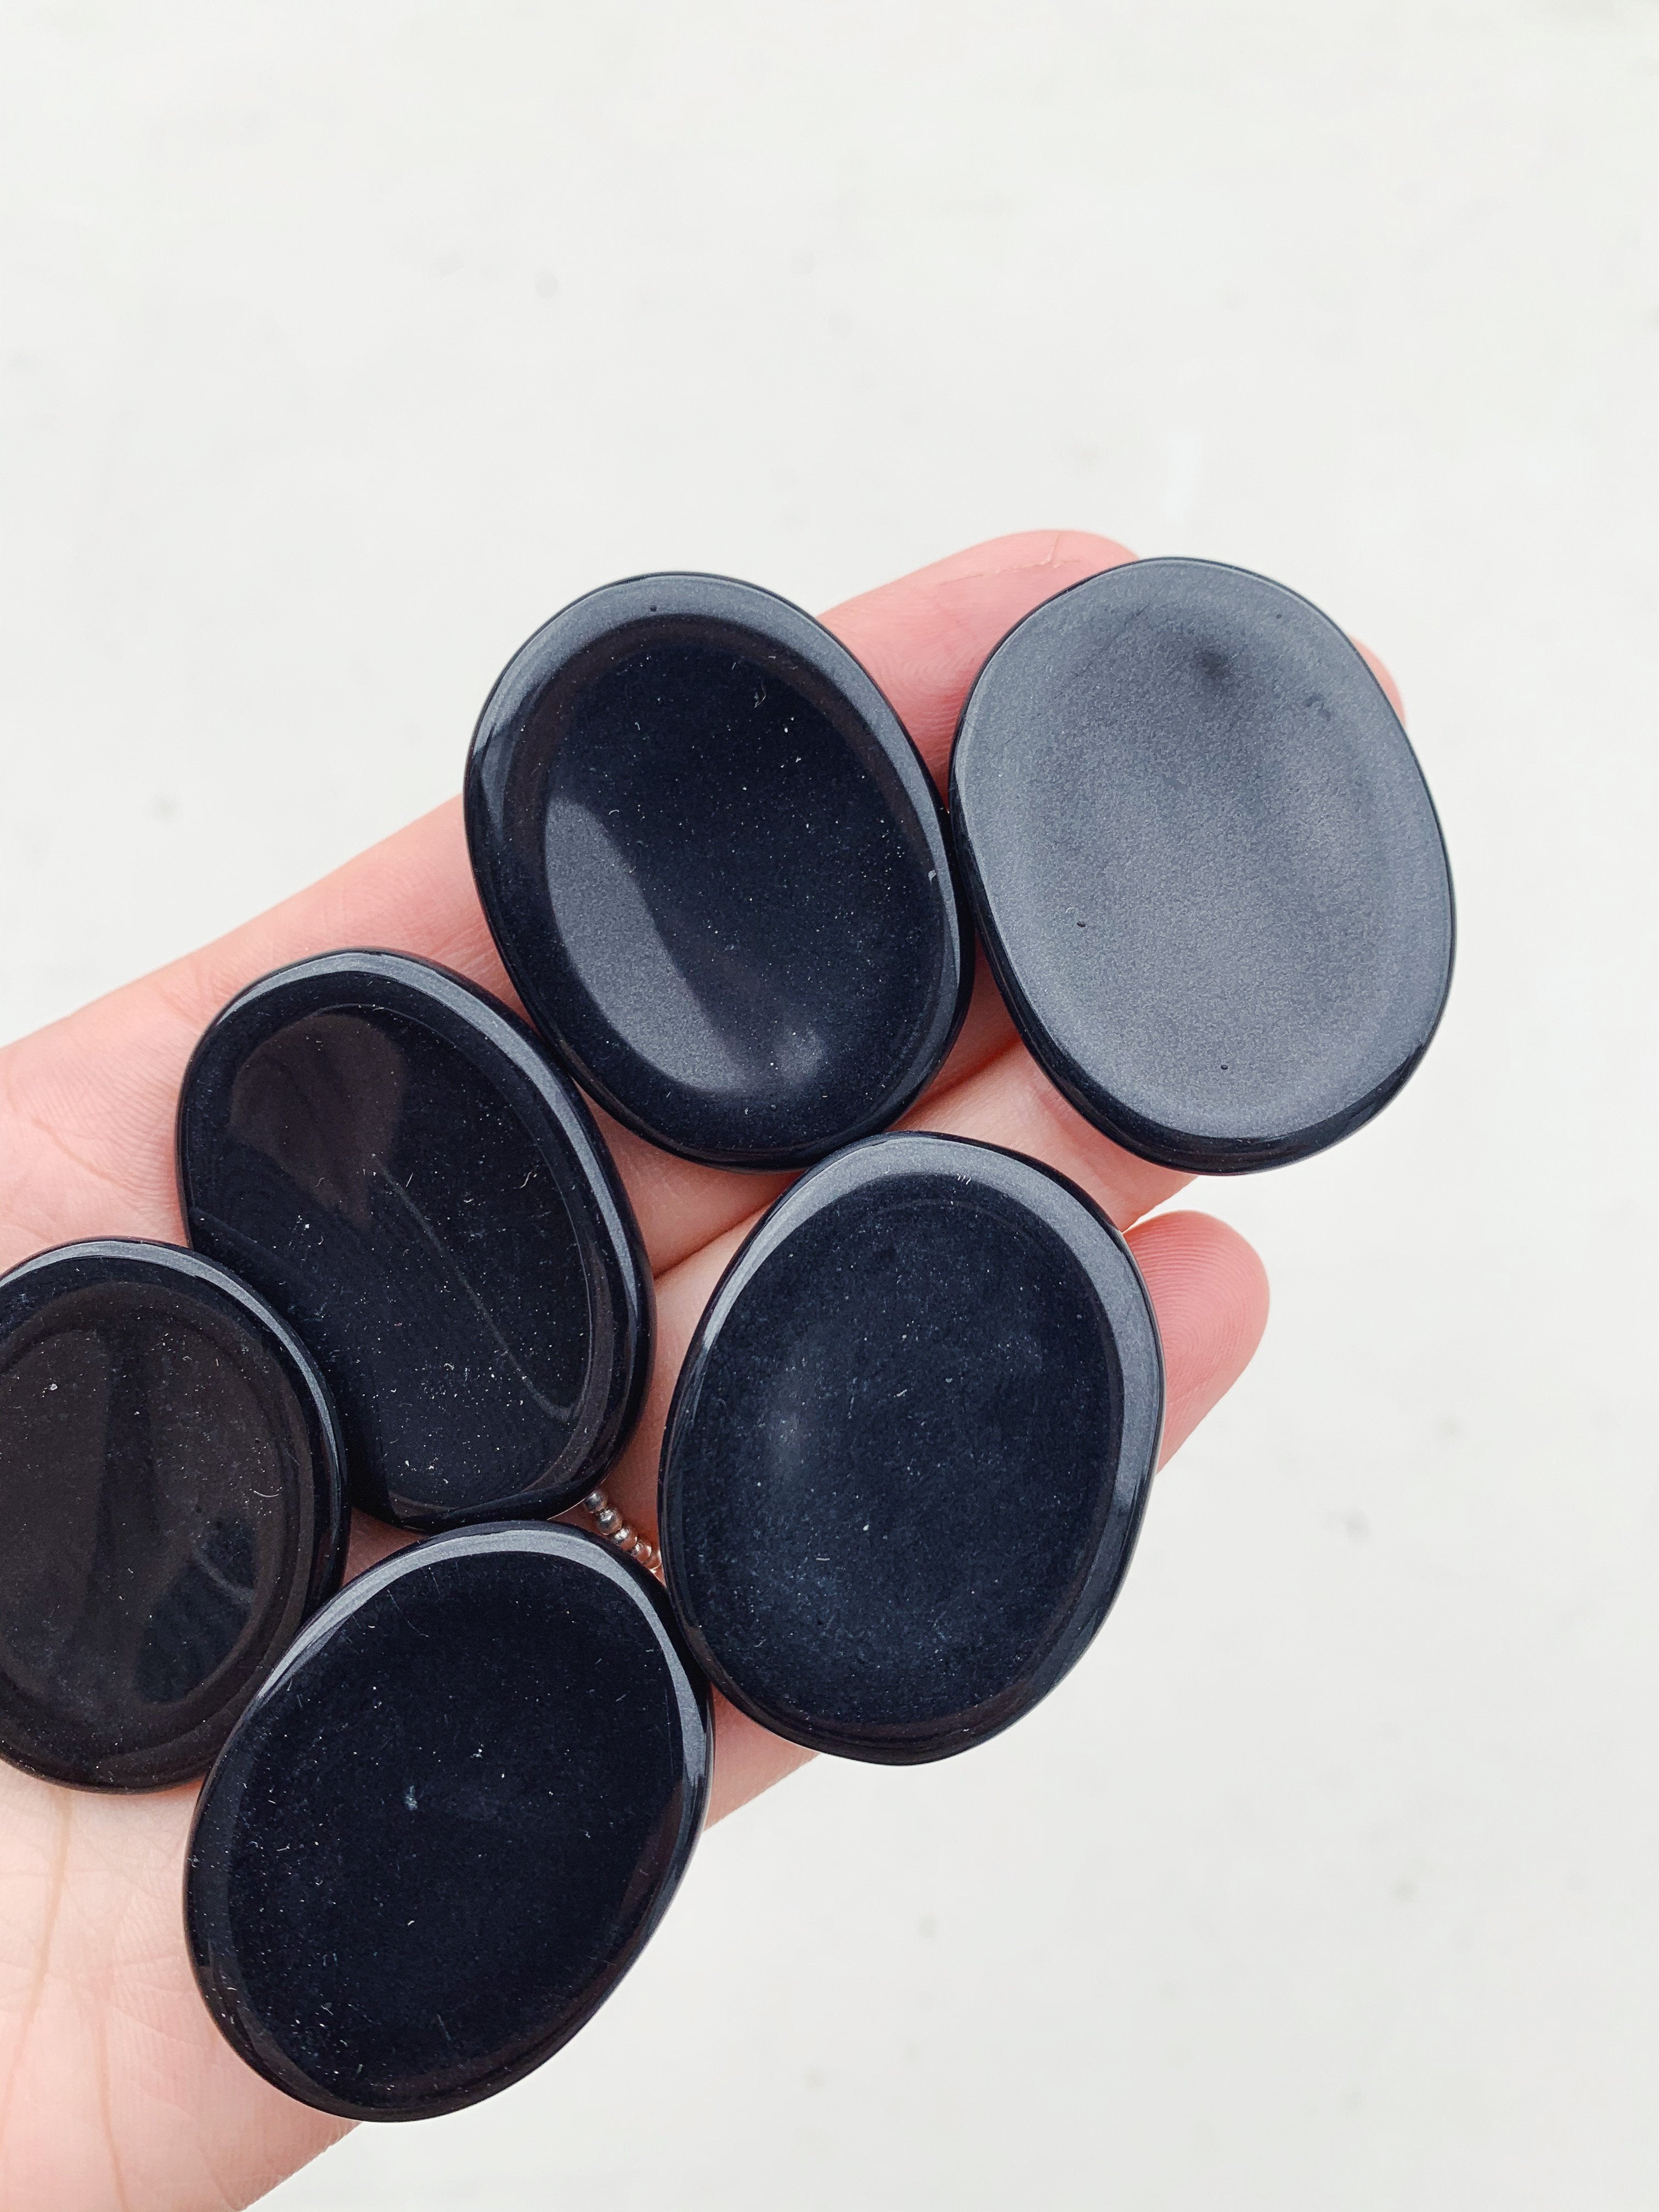 CLEANSE & CO. Black Obsidian Worry Stone. Ethically Sourced Crystals.